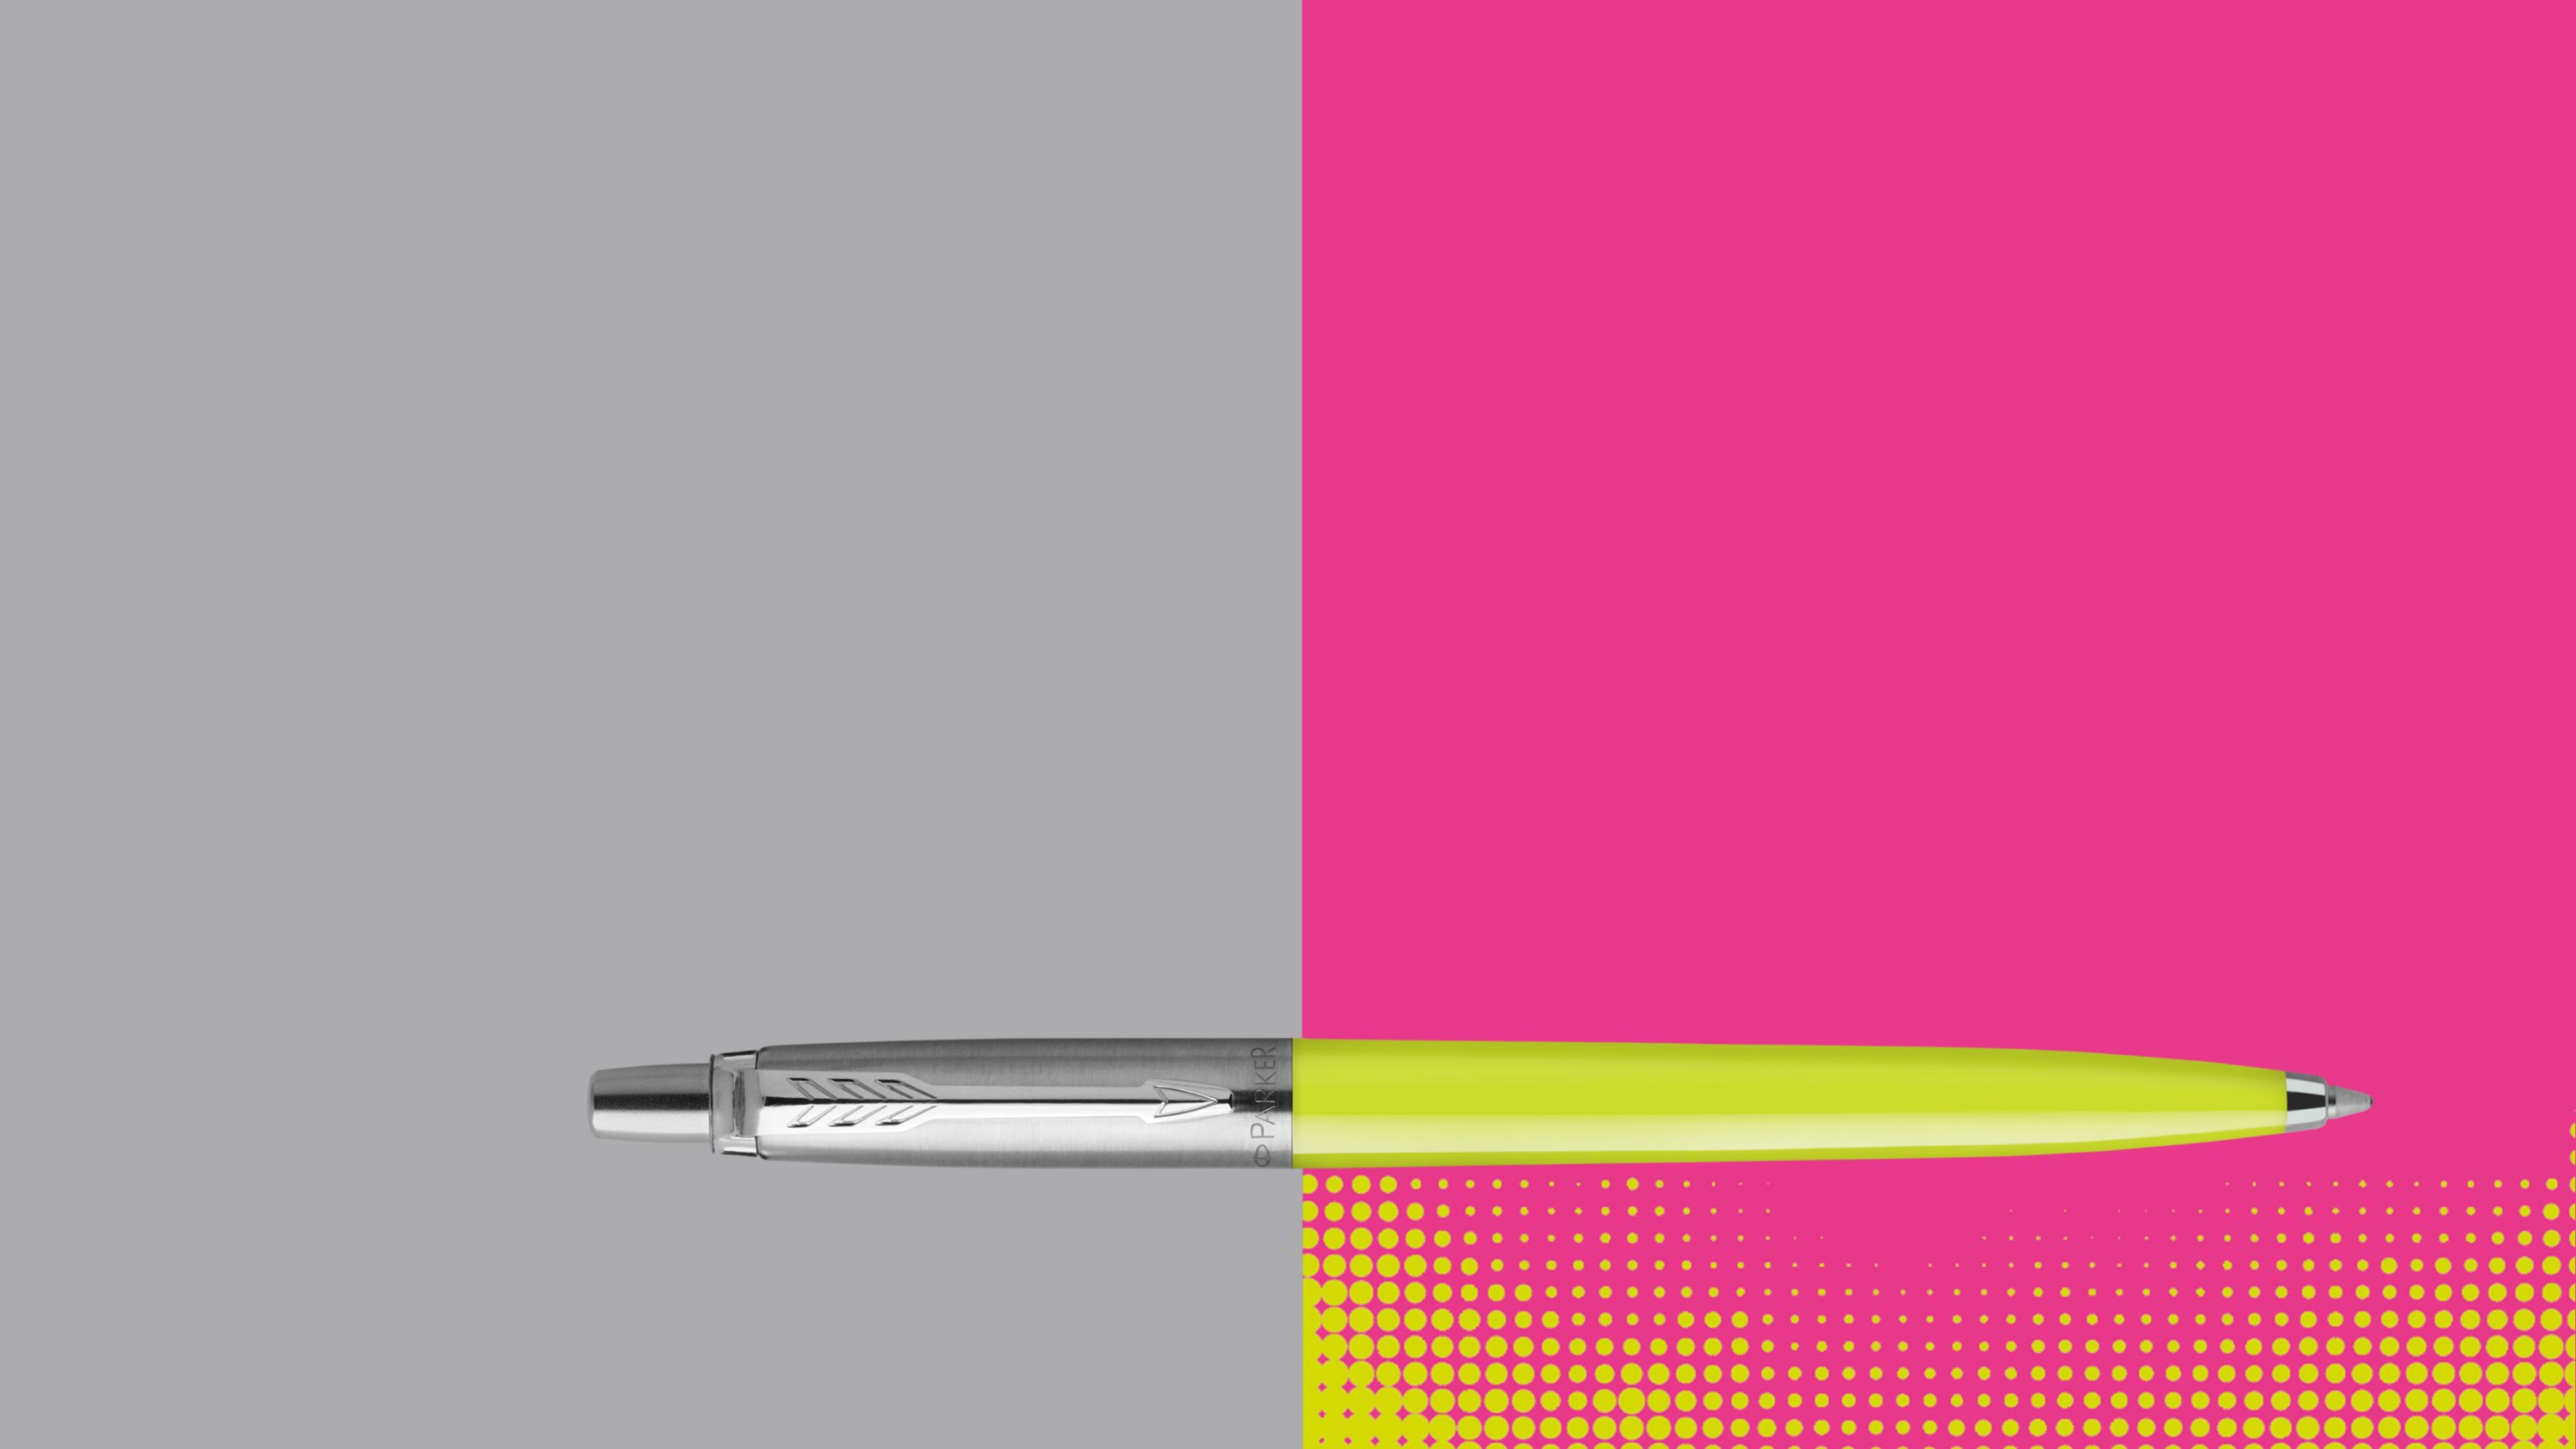 A Jotter Pop Art ballpoint pen with chrome trim over a two-toned background.